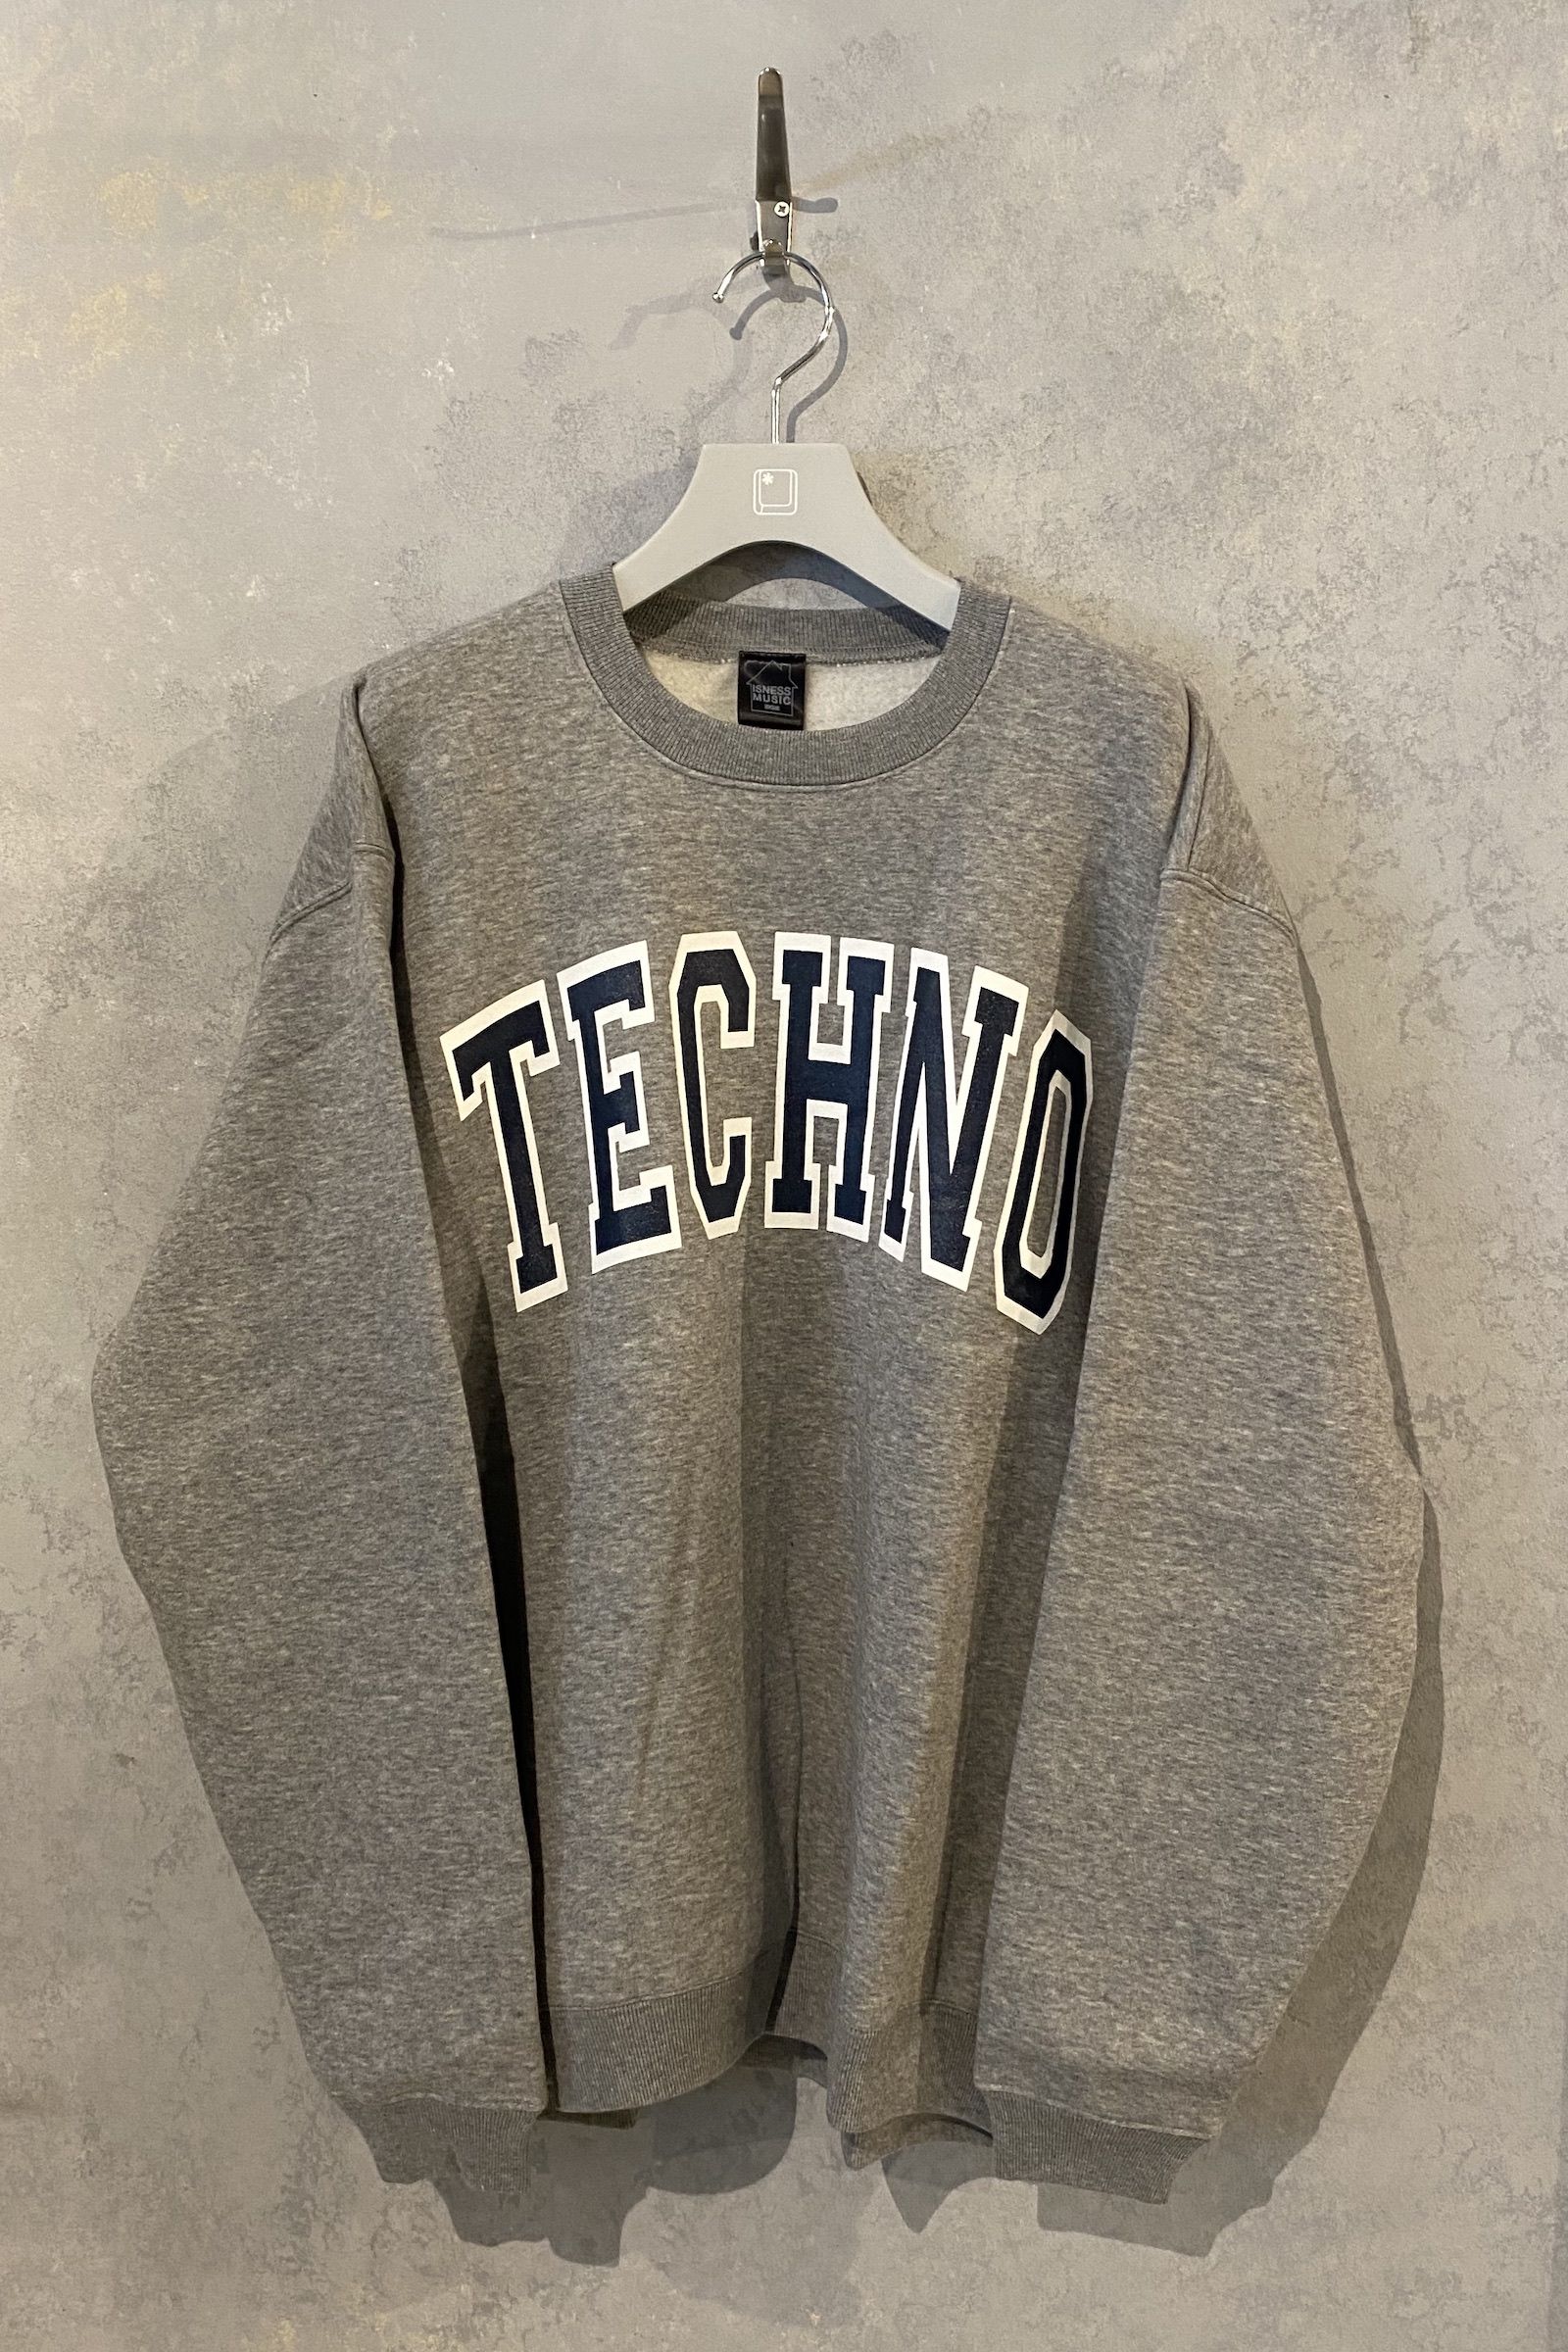 is-ness - is-ness music techno sweat 21aw | asterisk